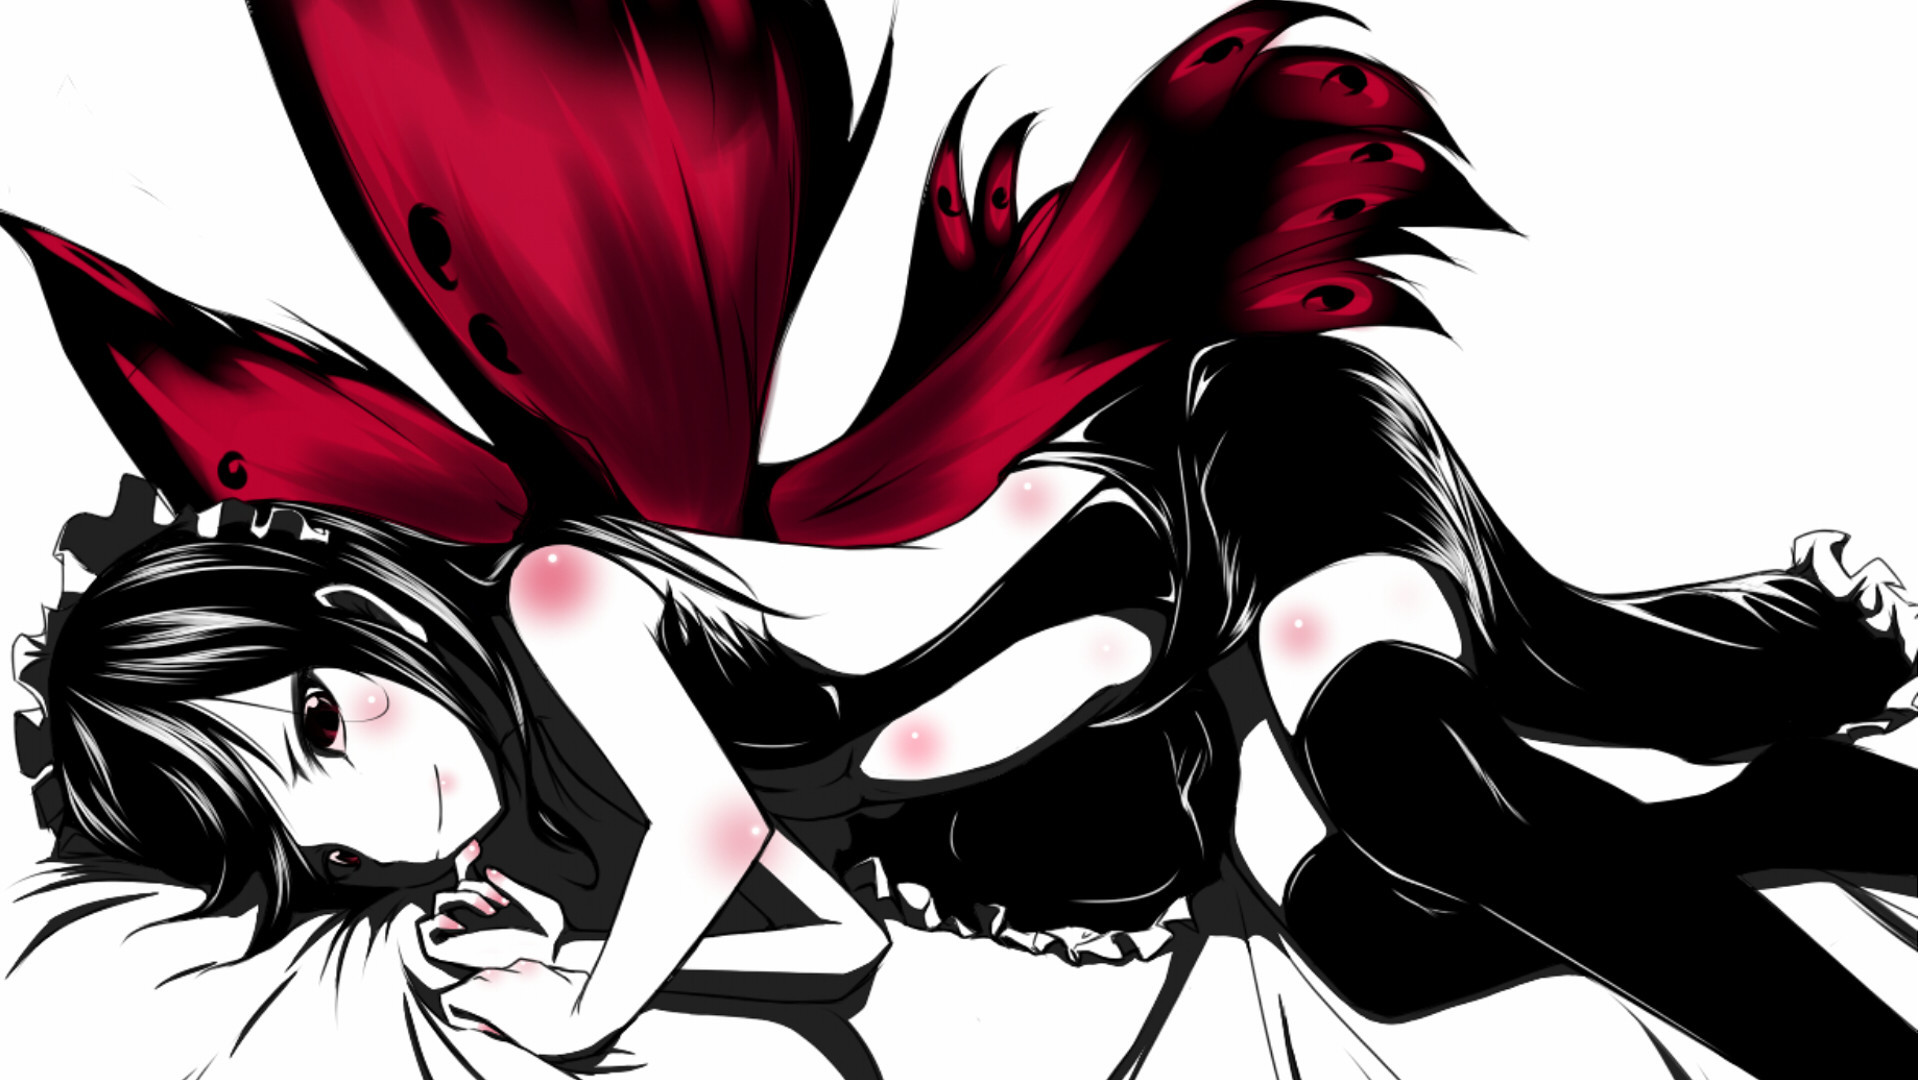 1920x1080 Anime Girl Black and Red Wallpaper